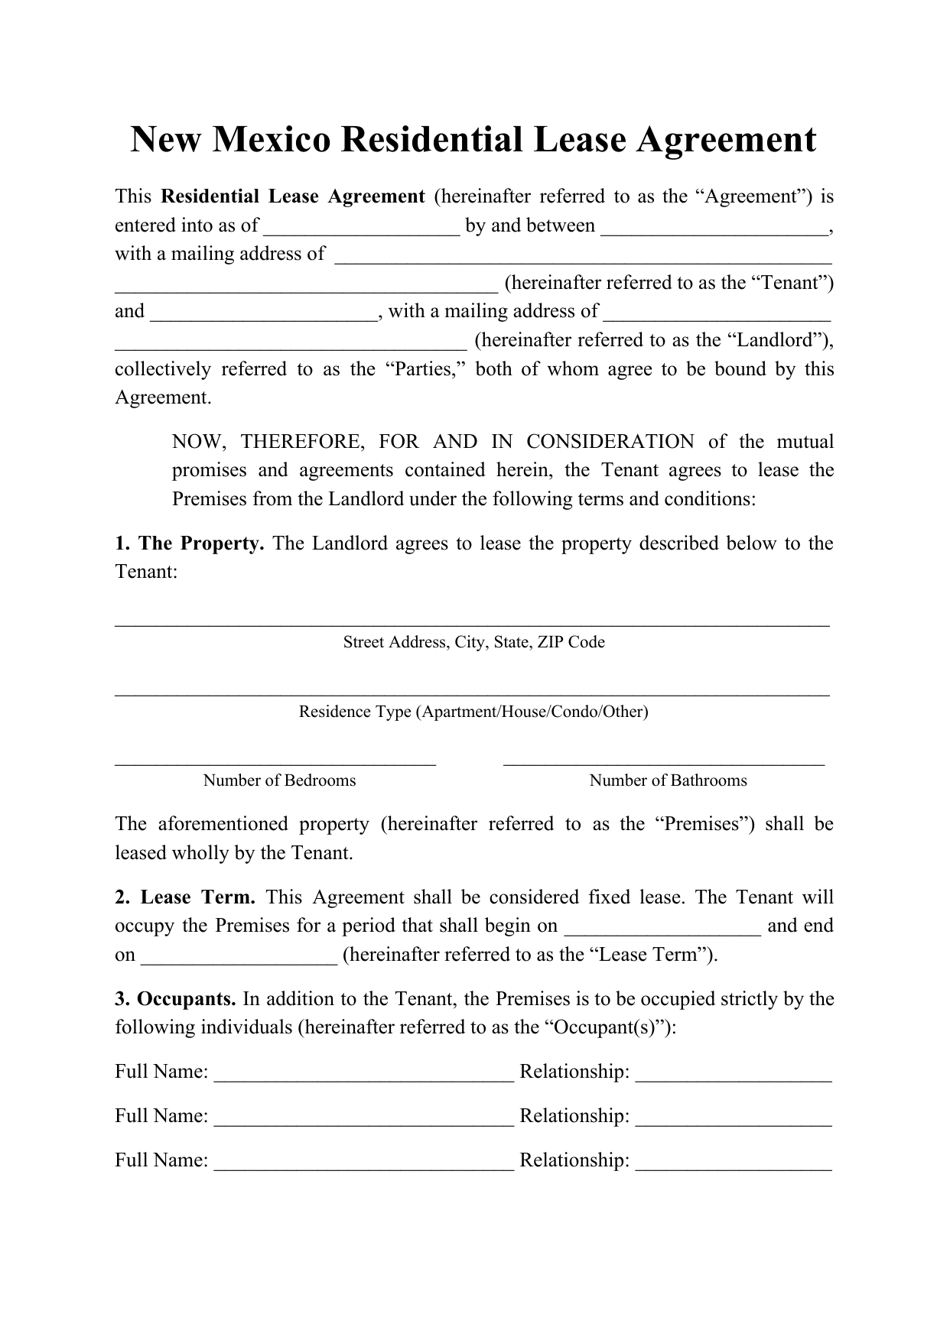 new mexico residential lease agreement template download printable pdf